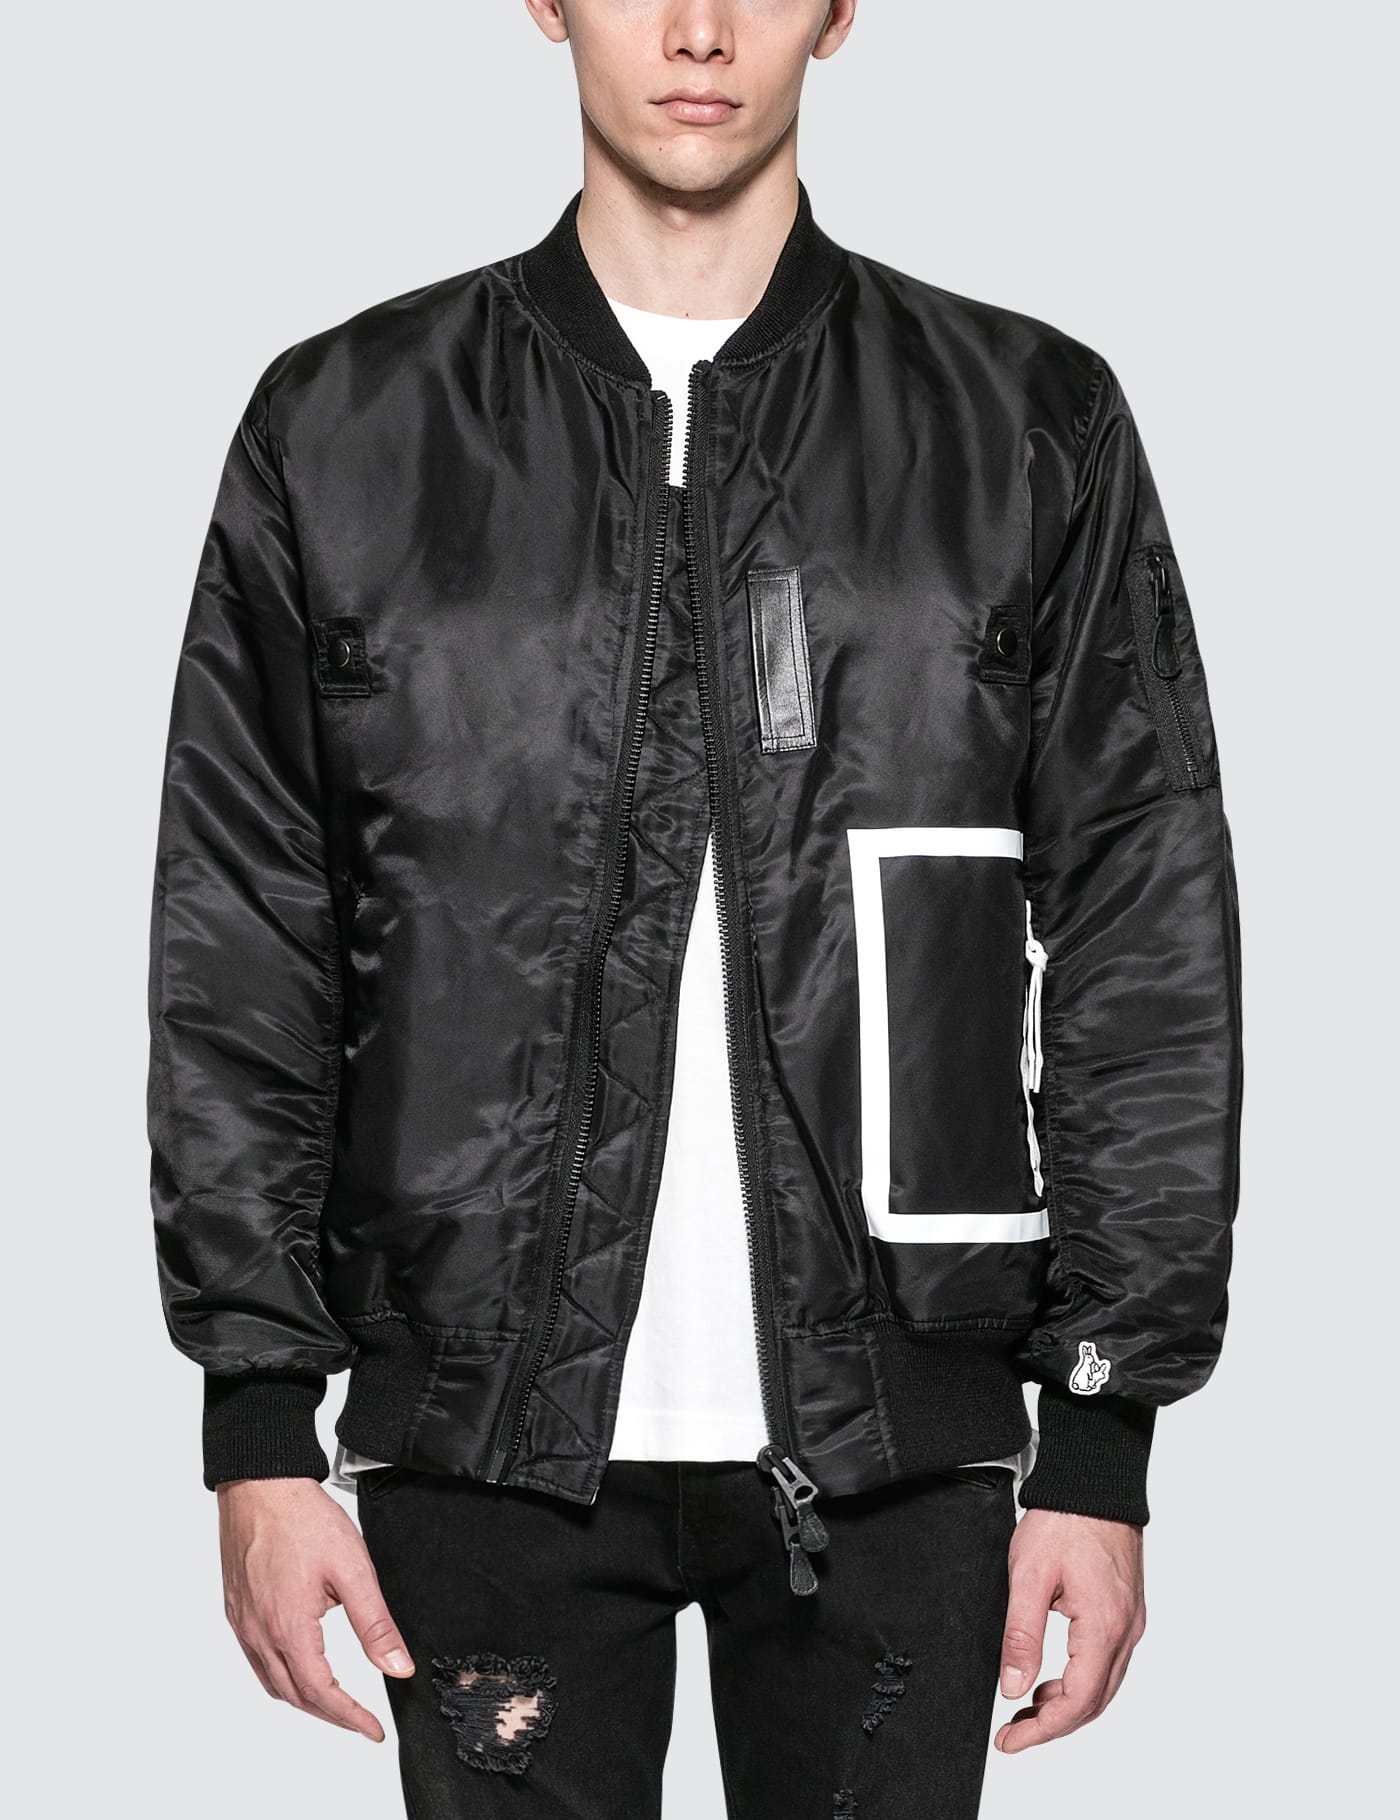 FR2 - MA-1 Jacket | HBX - Globally Curated Fashion and Lifestyle 